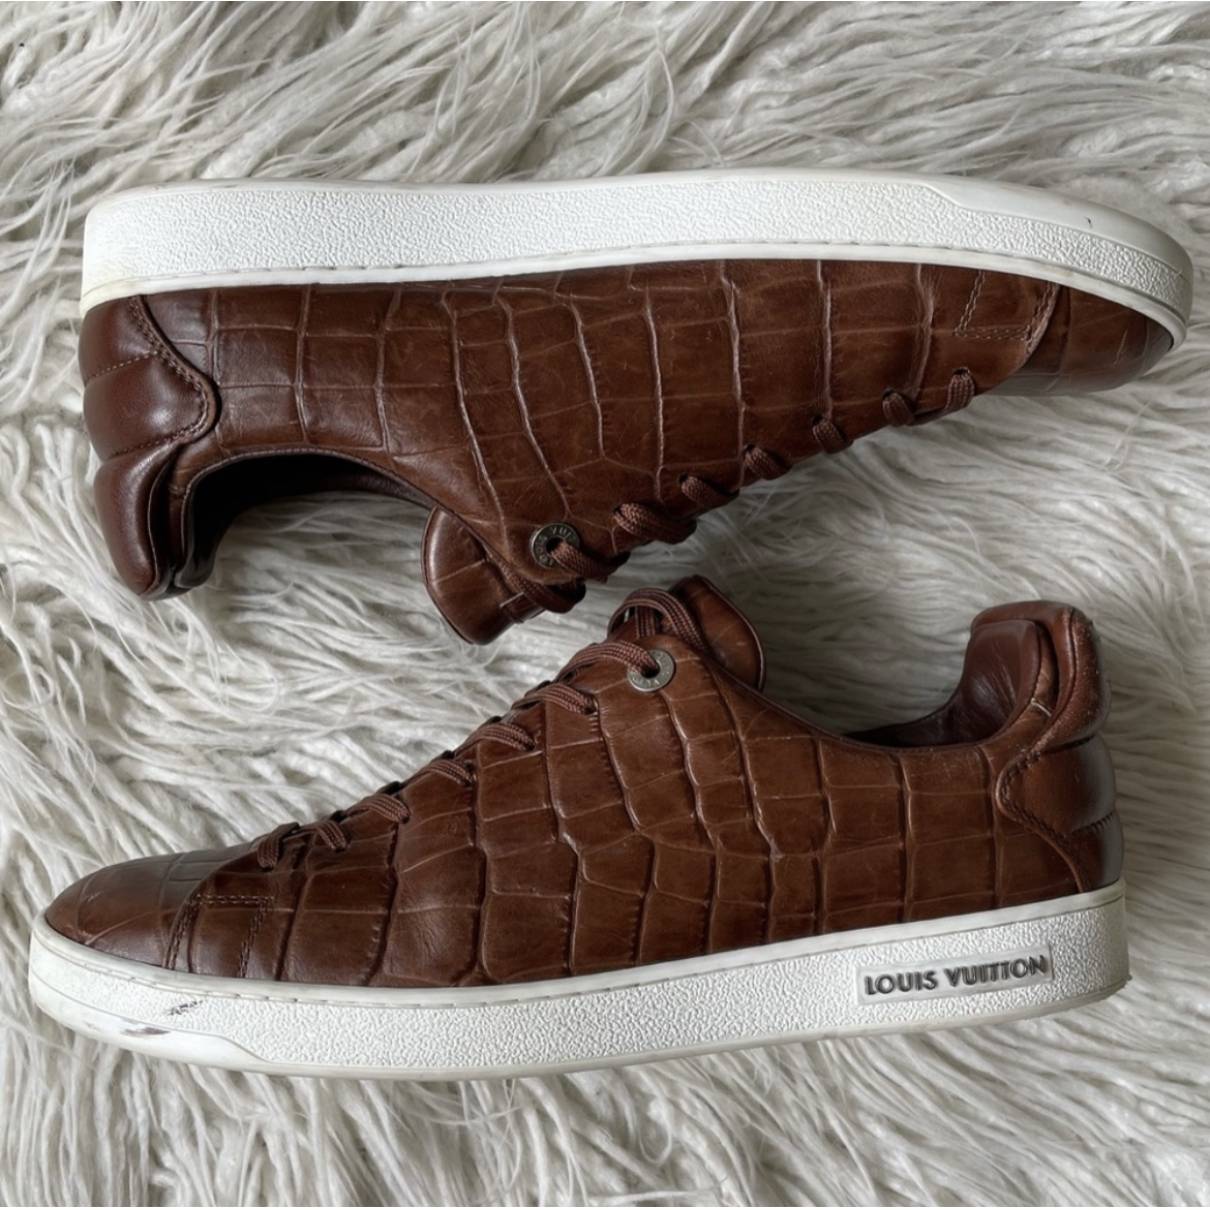 Louis Vuitton - Authenticated FRONTROW Trainer - Leather Brown Crocodile for Men, Very Good Condition